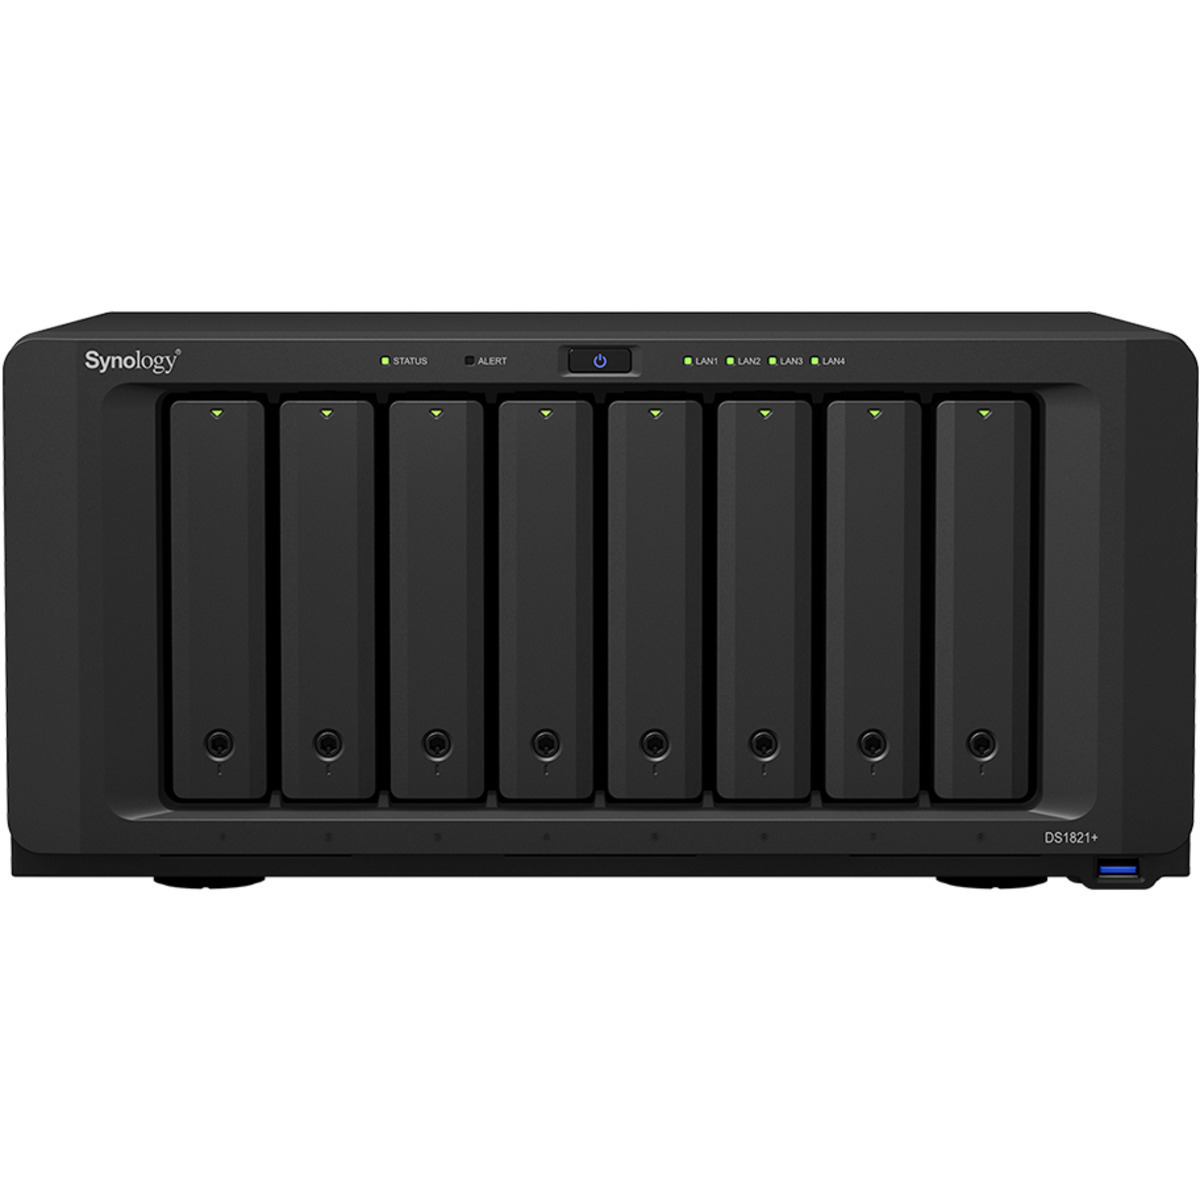 buy $3912 Synology DiskStation DS1821+ 128tb Desktop NAS - Network Attached Storage Device 8x16000gb Toshiba Enterprise Capacity MG08ACA16TE 3.5 7200rpm SATA 6Gb/s HDD ENTERPRISE Class Drives Installed - Burn-In Tested - FREE RAM UPGRADE - nas headquarters buy network attached storage server device das new raid-5 free shipping usa DiskStation DS1821+